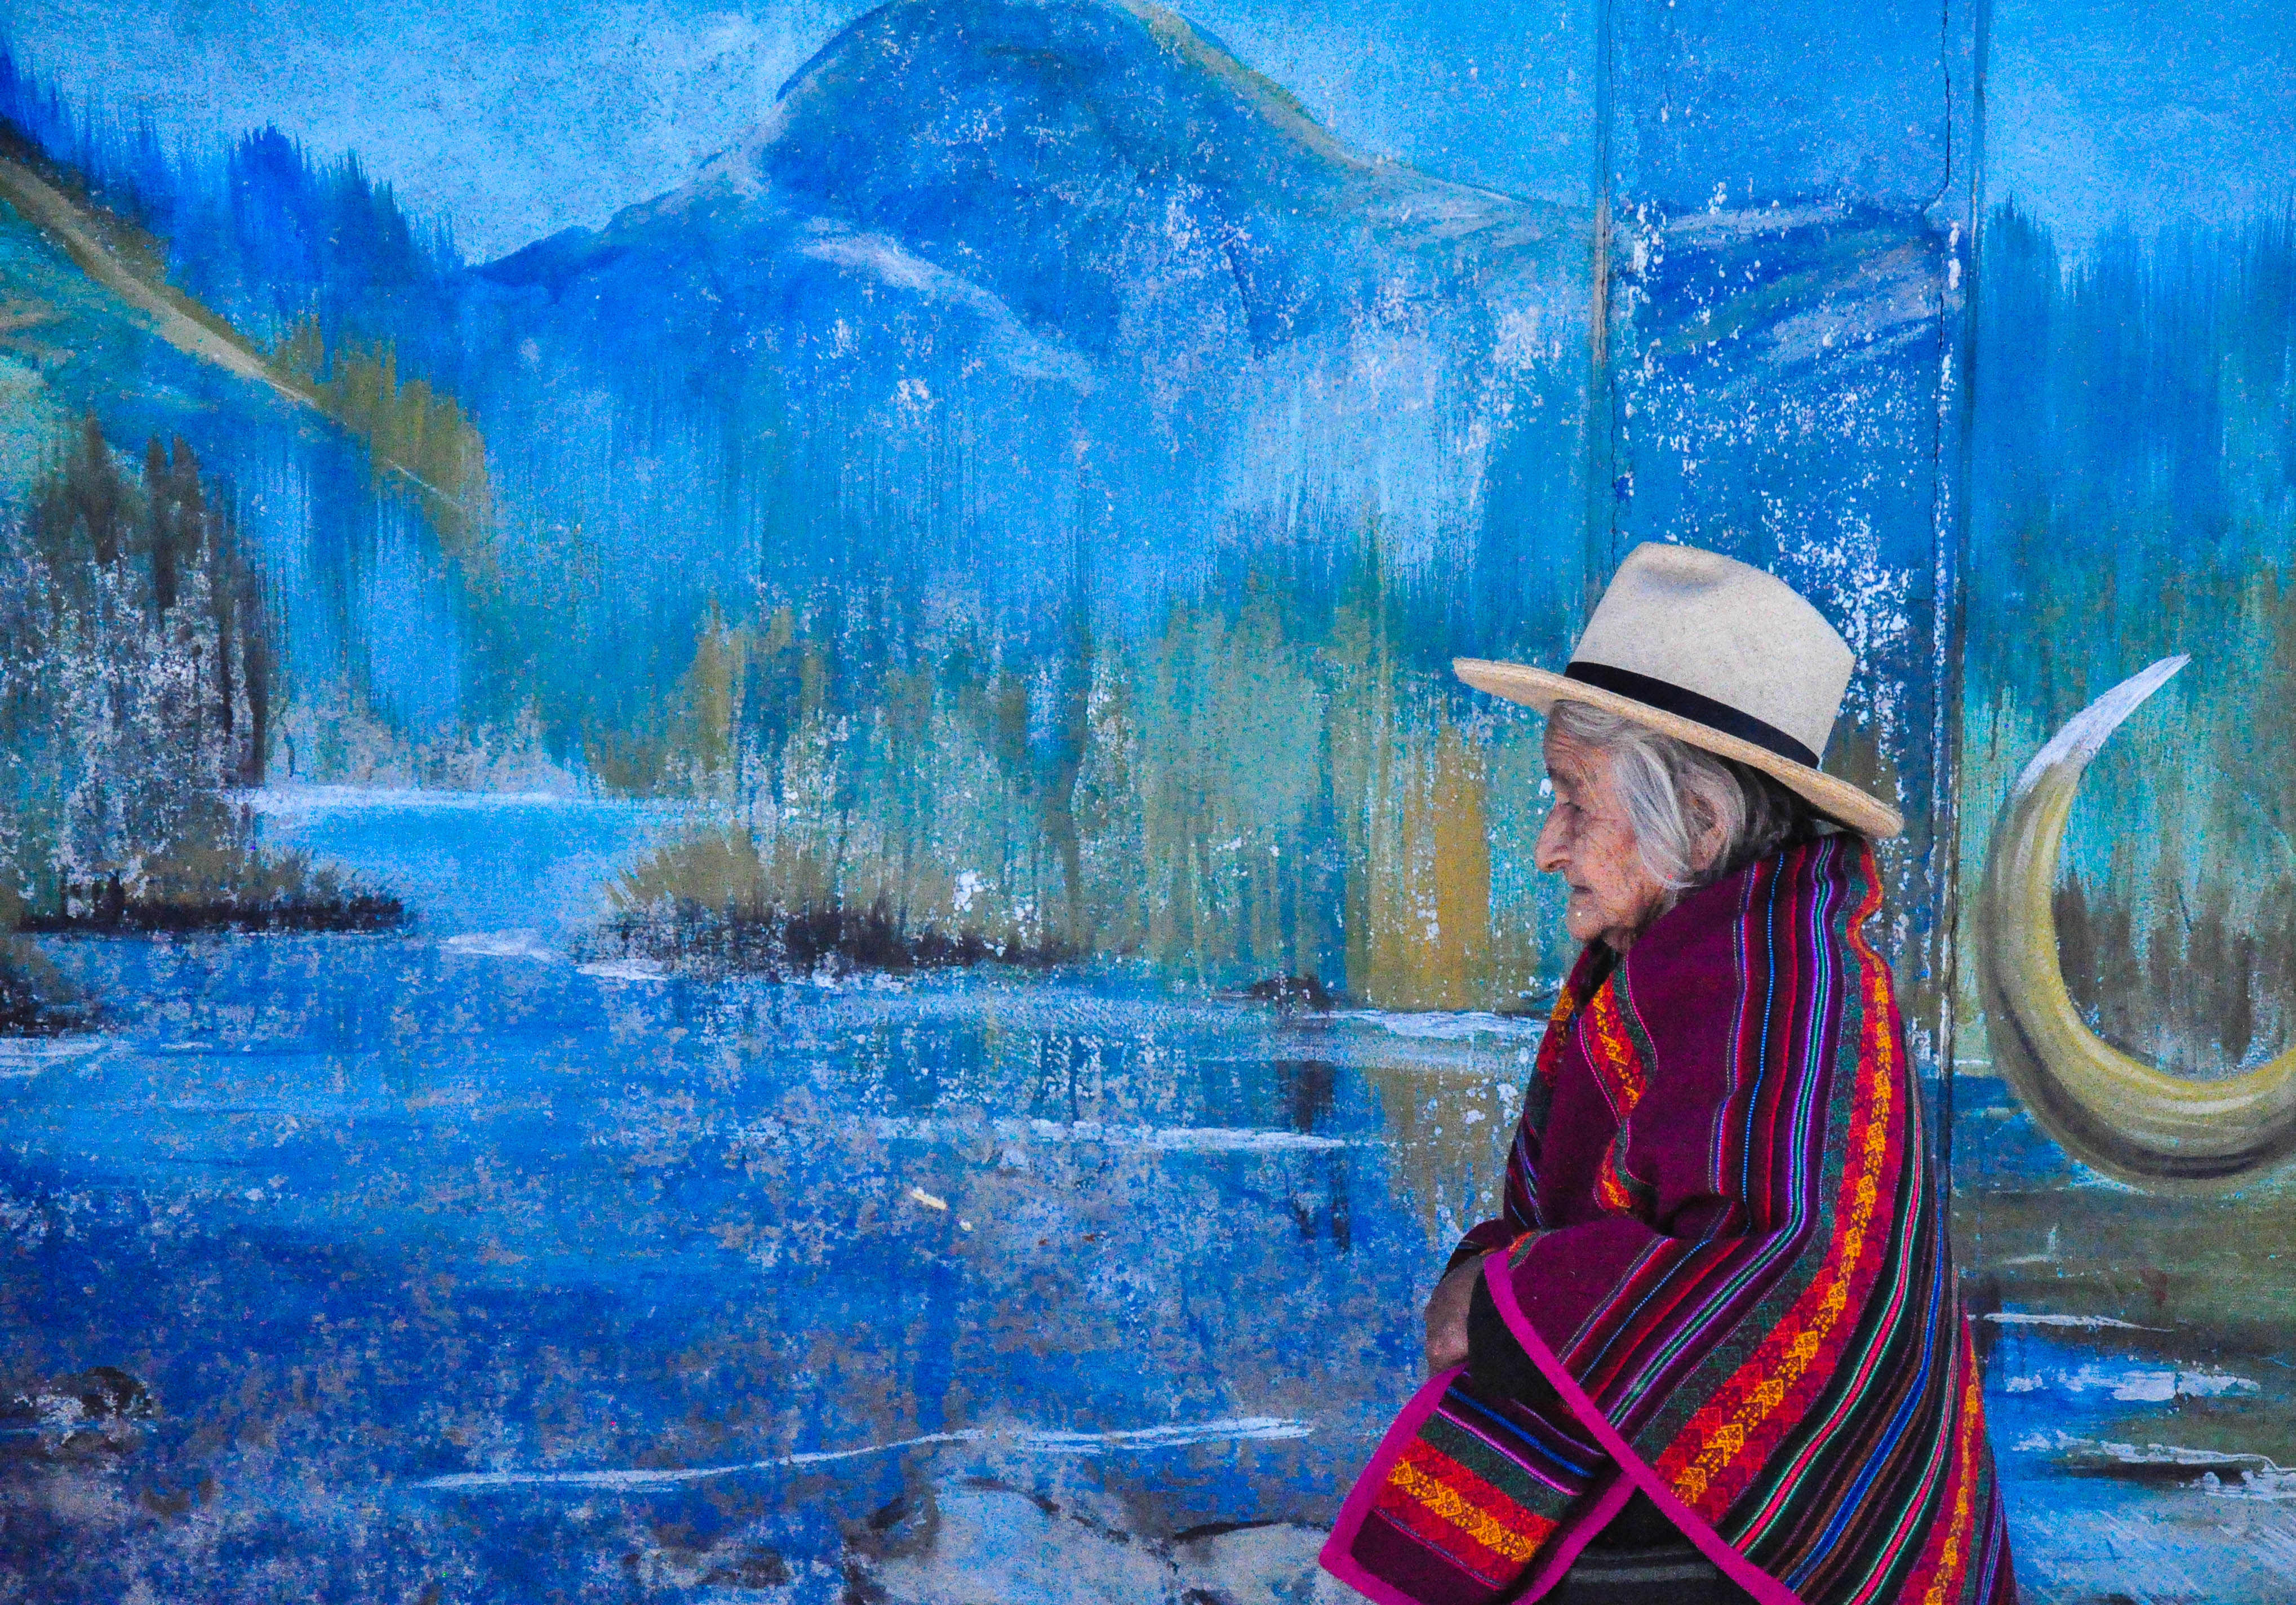 Local woman of the town of Huaraz
